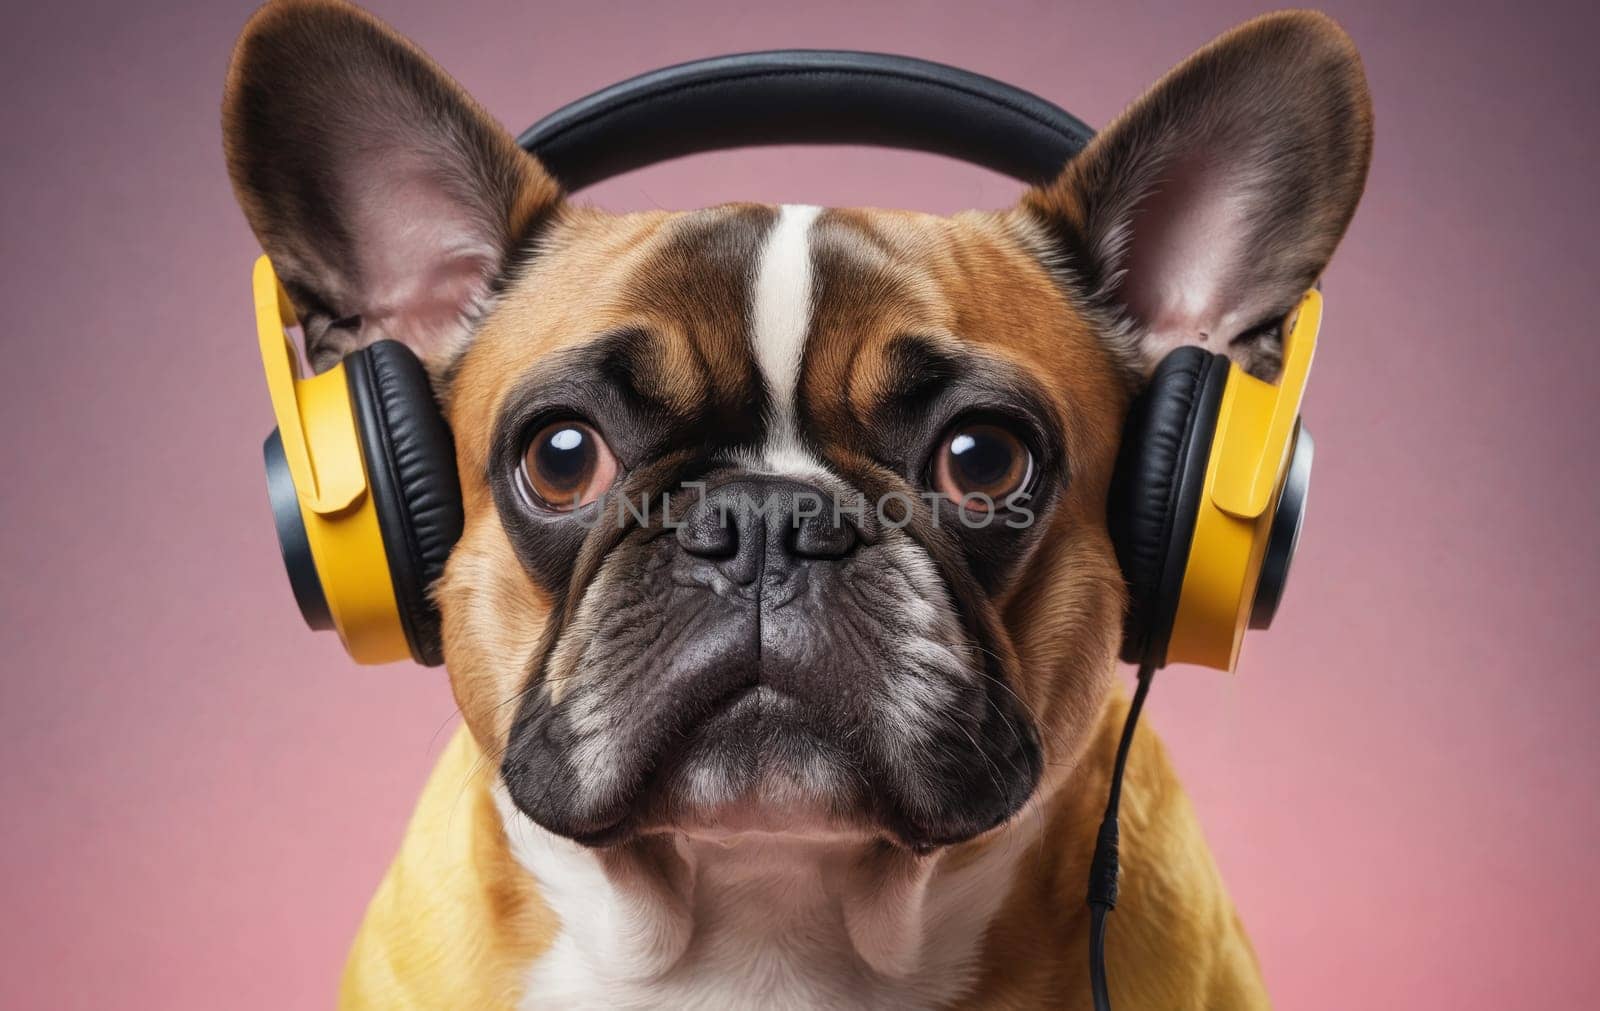 Fawn French Bulldog wearing headphones on pink background by Andre1ns